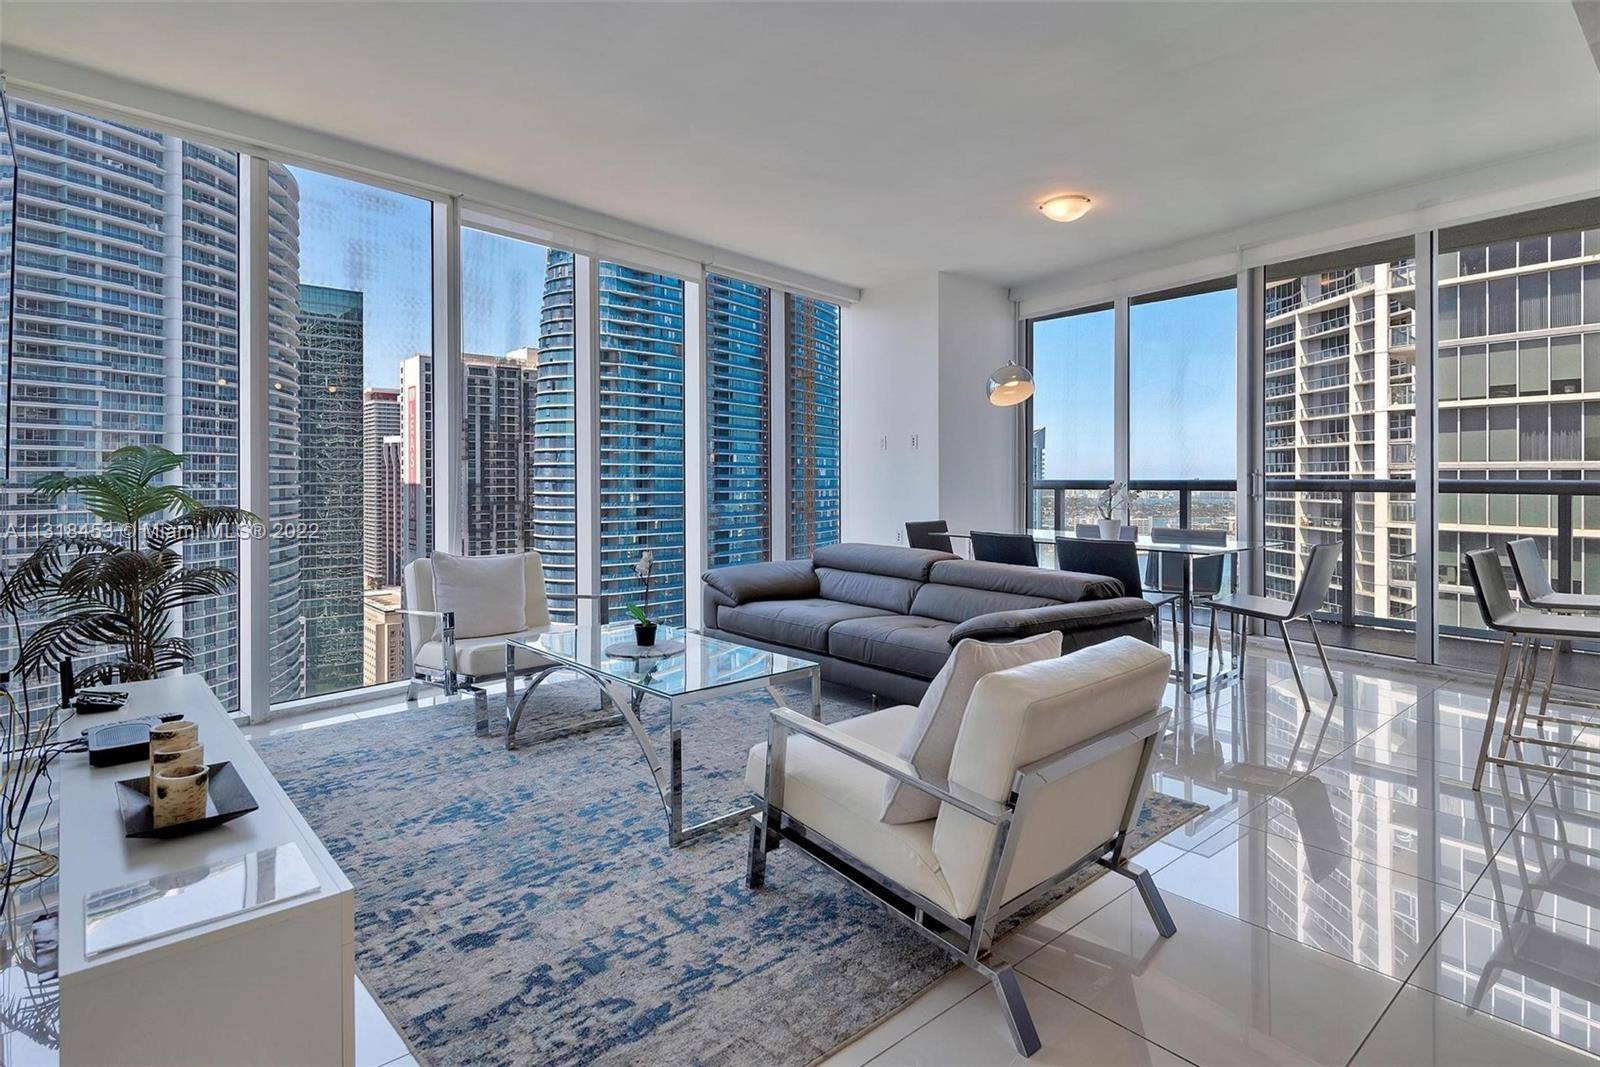 Welcome to Icon Brickell Tower 3, the most amazing corner unit with stunning views of the Biscayne Bay, Miami River and Brickell Downtown Skyline.